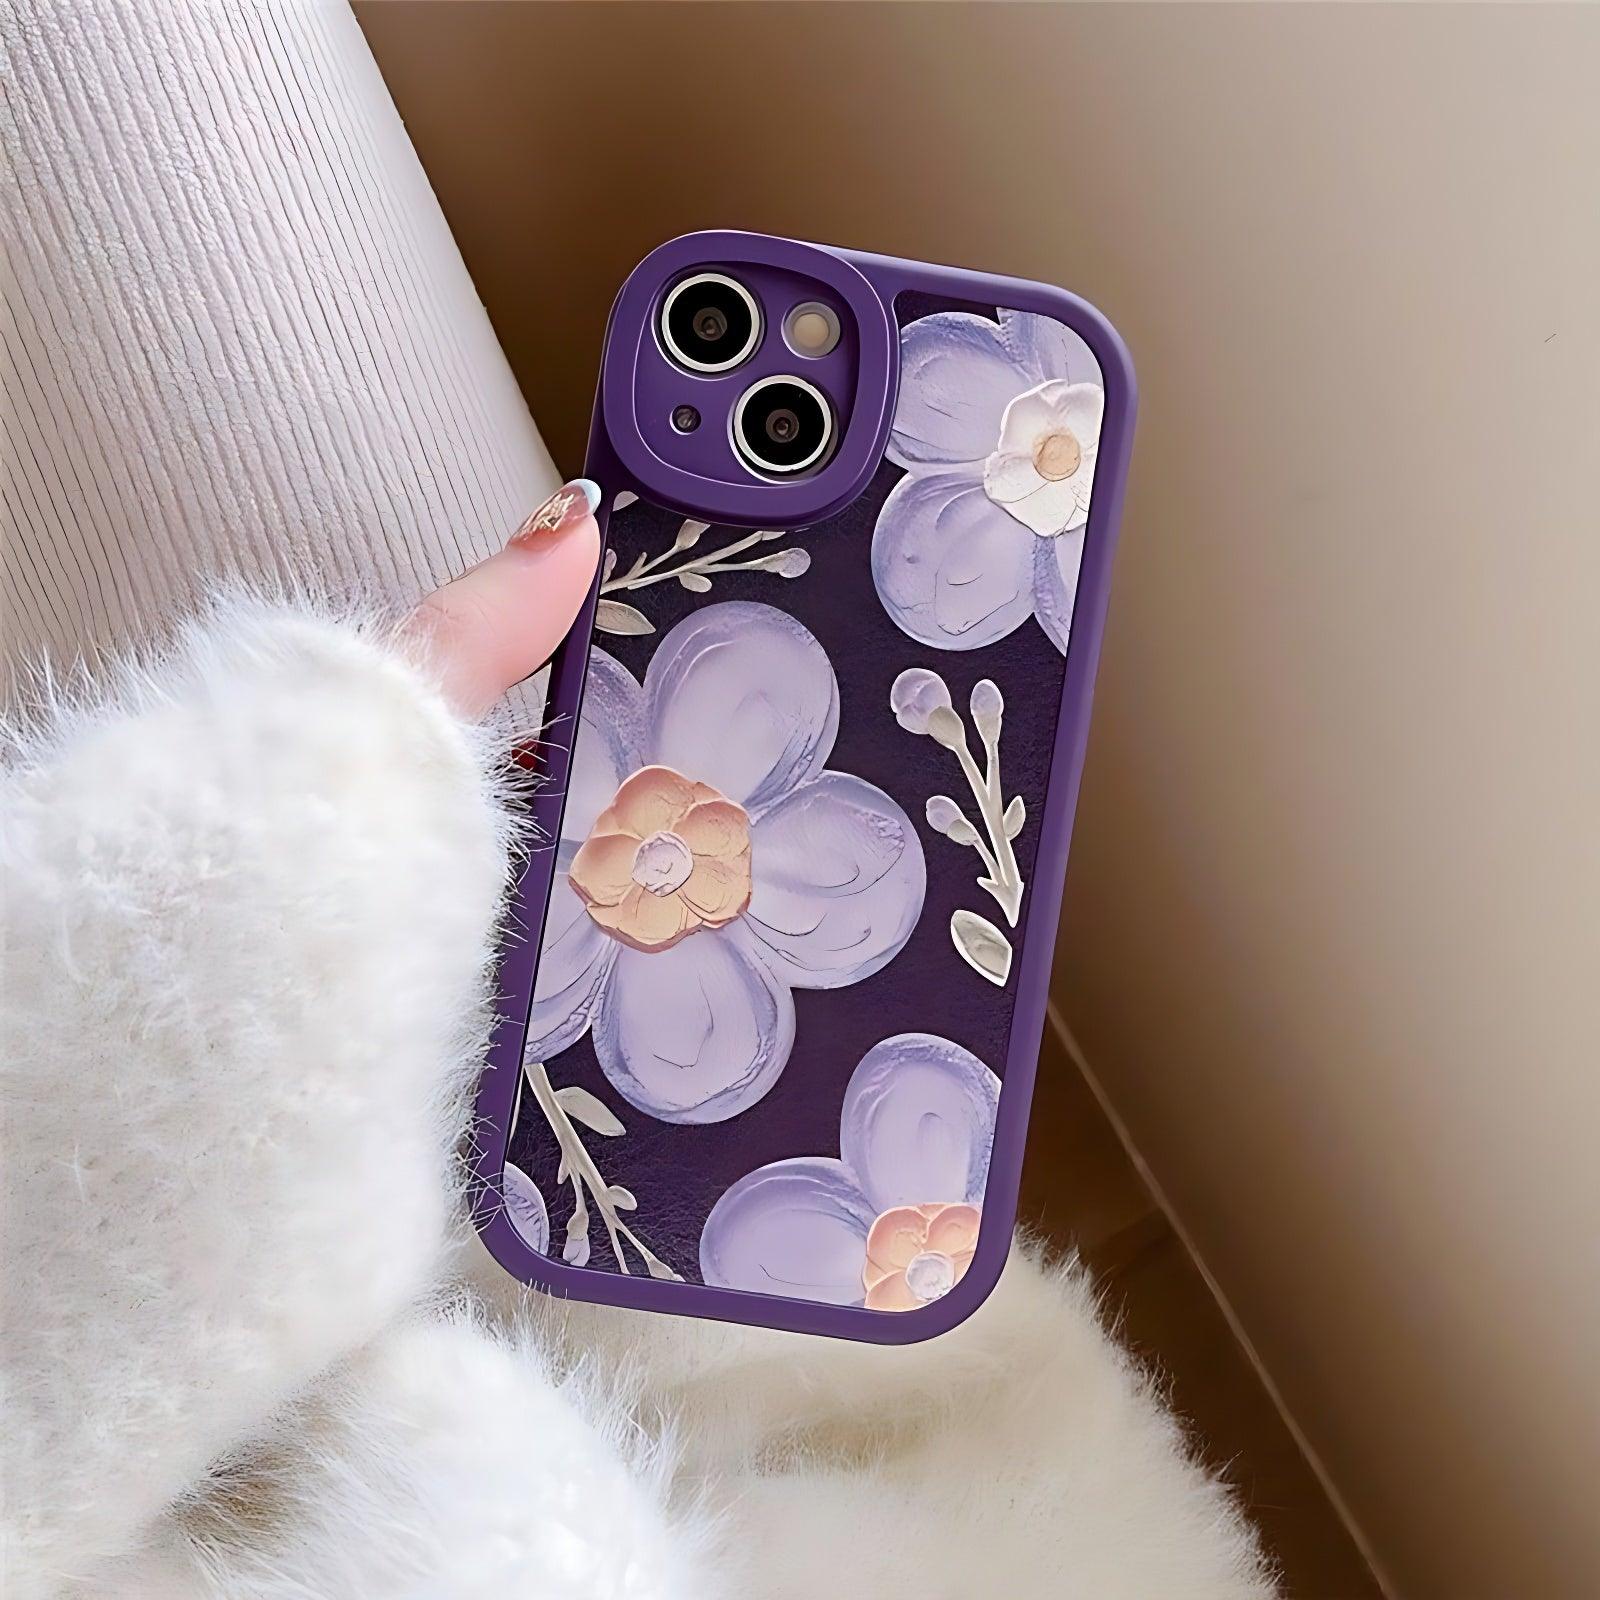 Flower Phone Cases - Touchy Style .